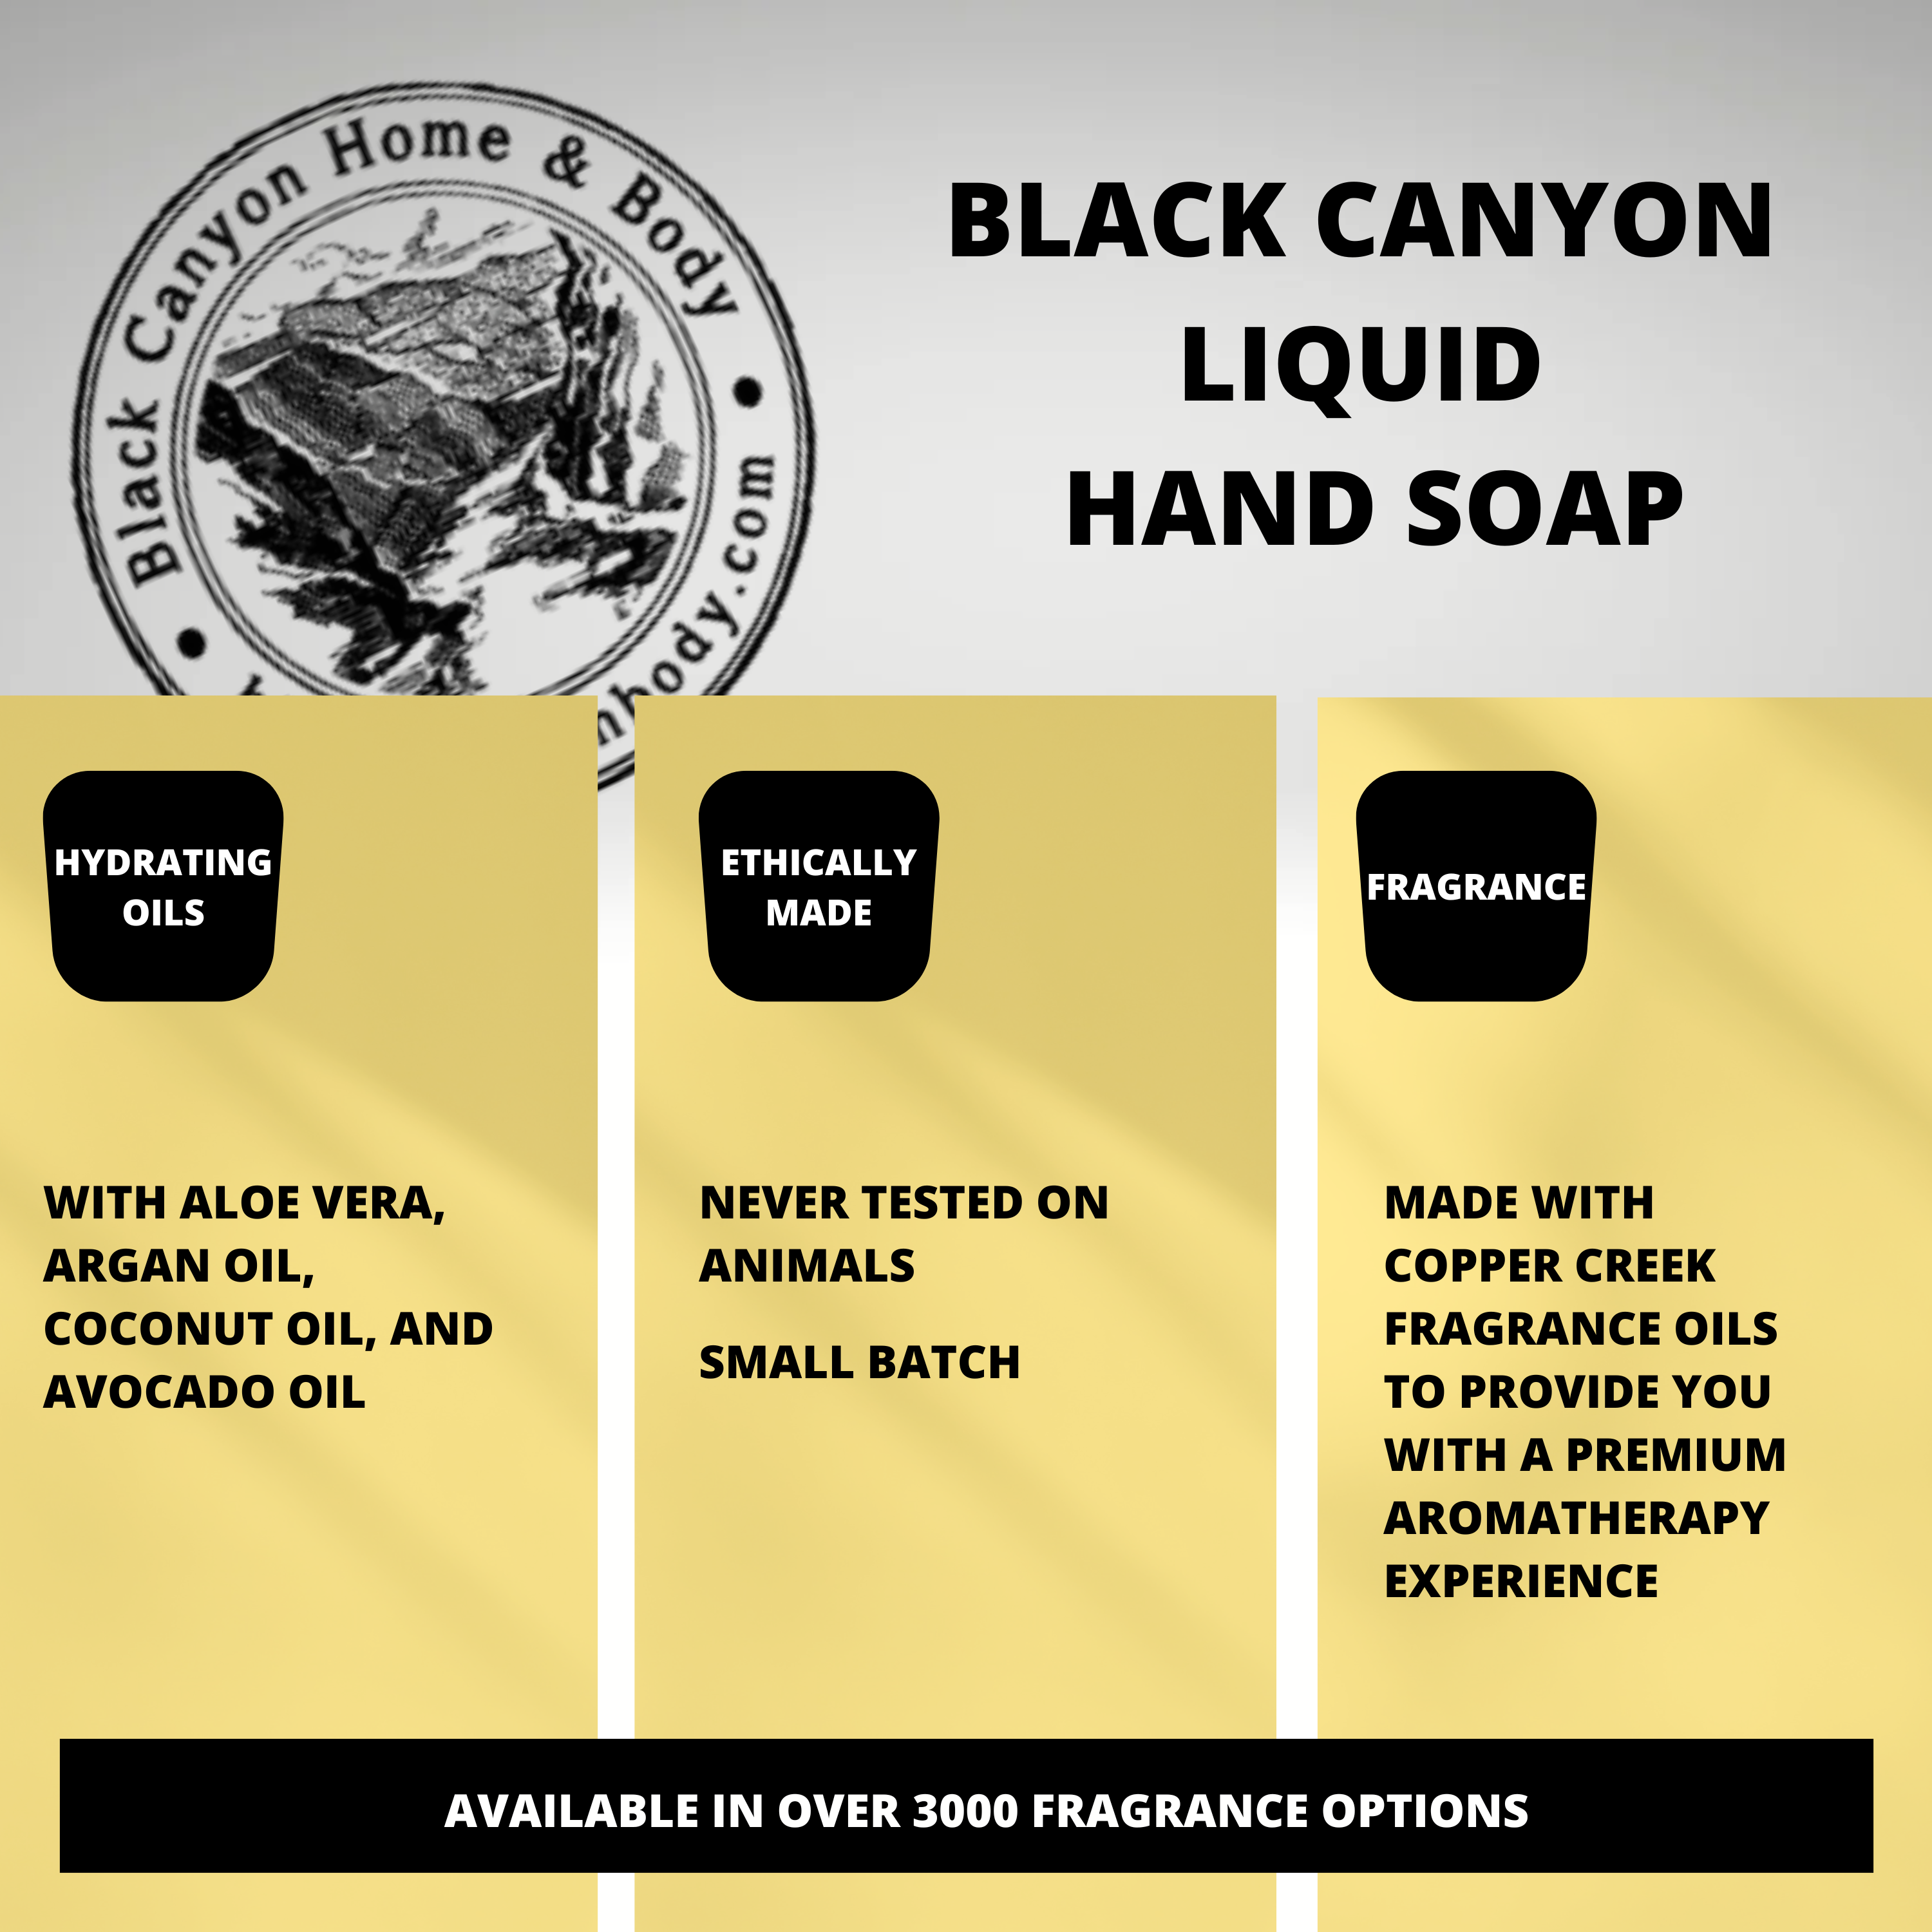 Black Canyon Buttered Popcorn Scented Liquid Hand Soap